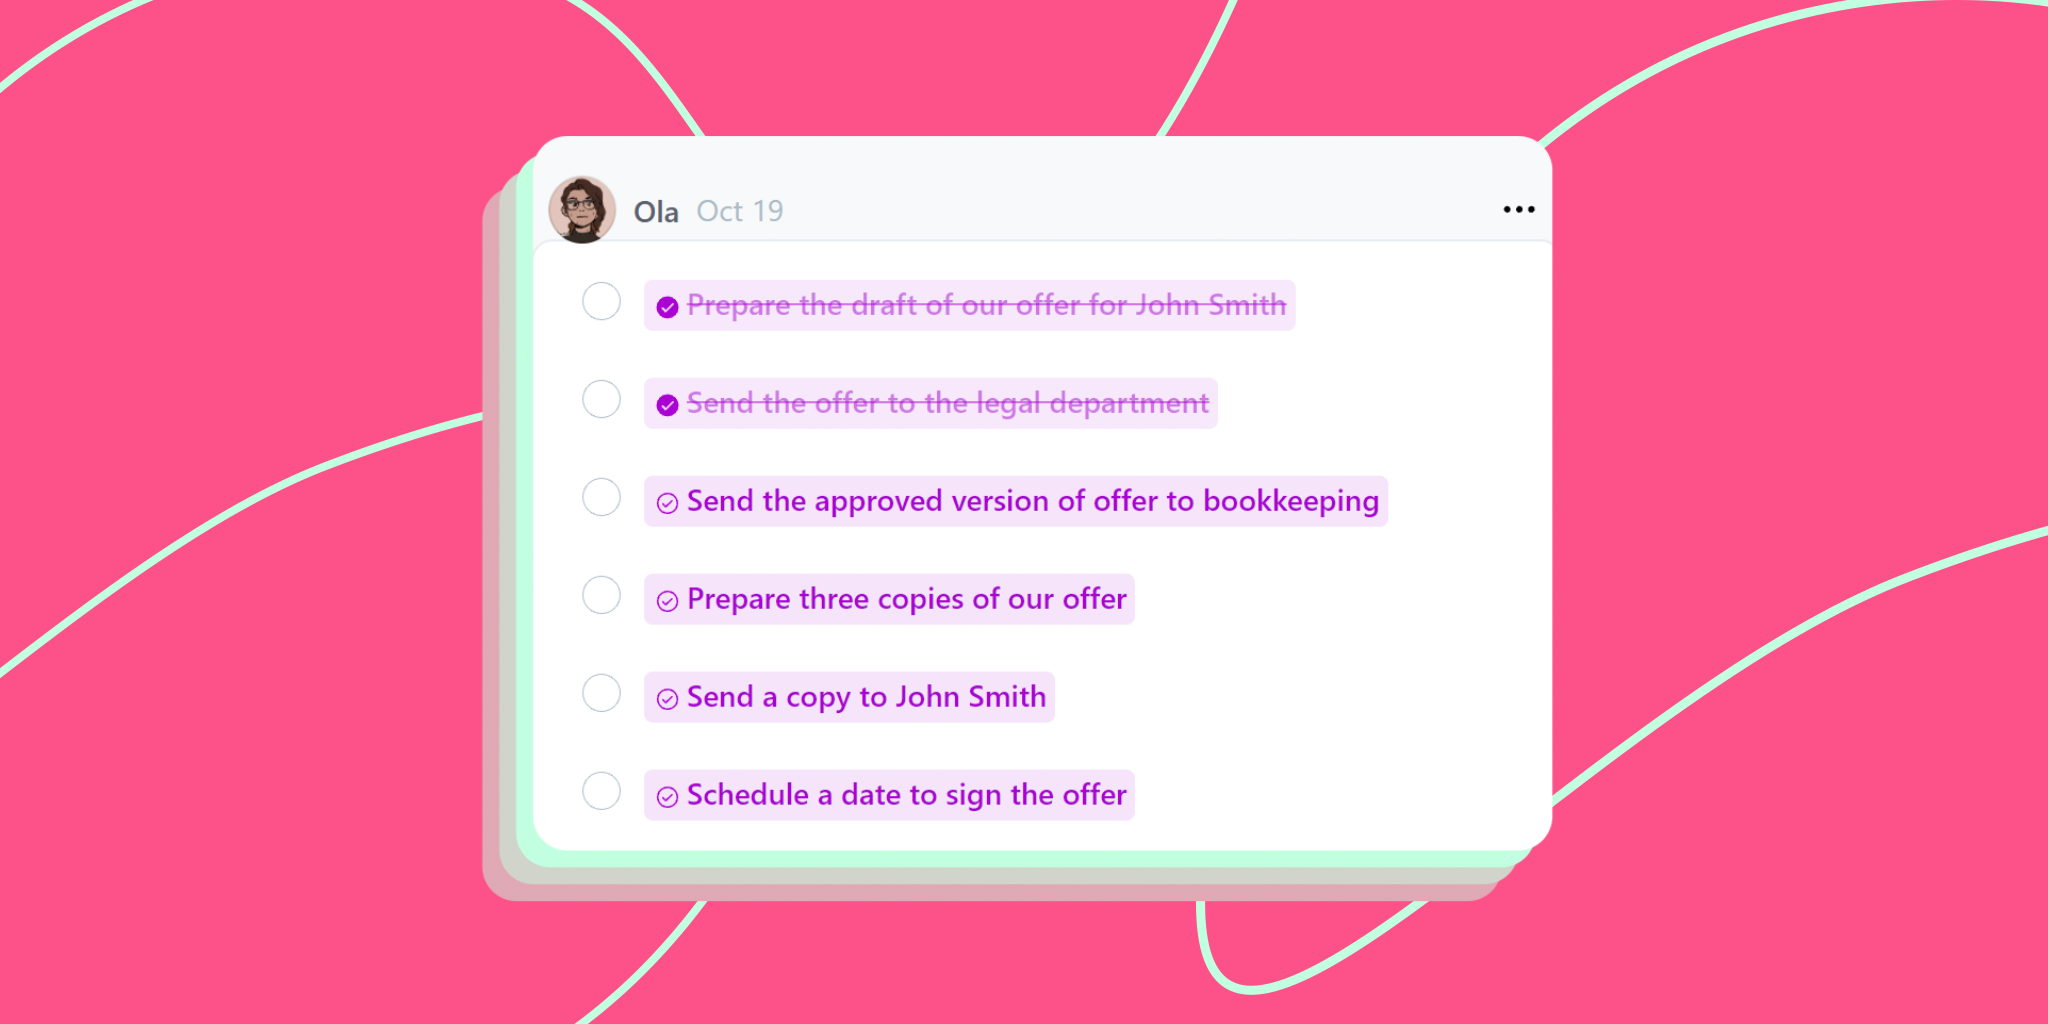 Link related tasks and save time